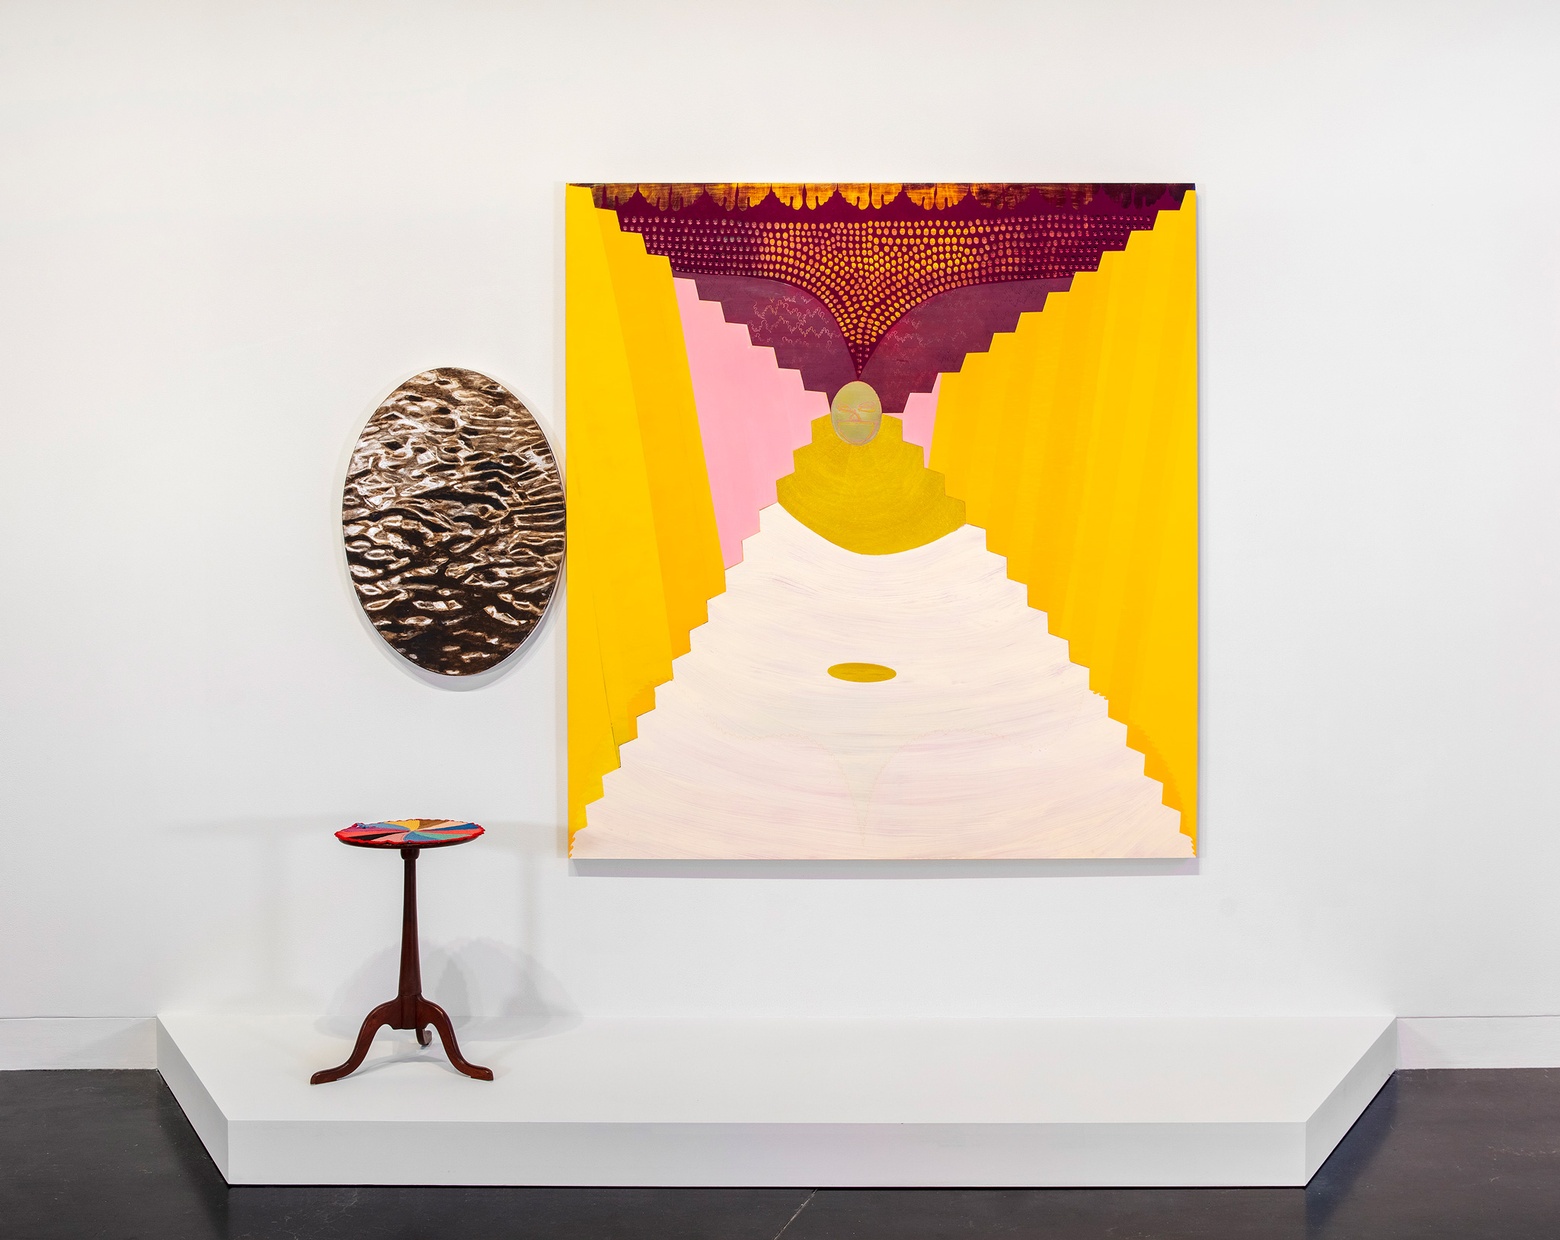 On a white wall, an oval artwork hangs next to a large, warm-colored painting with a small wooden end table beneath them.